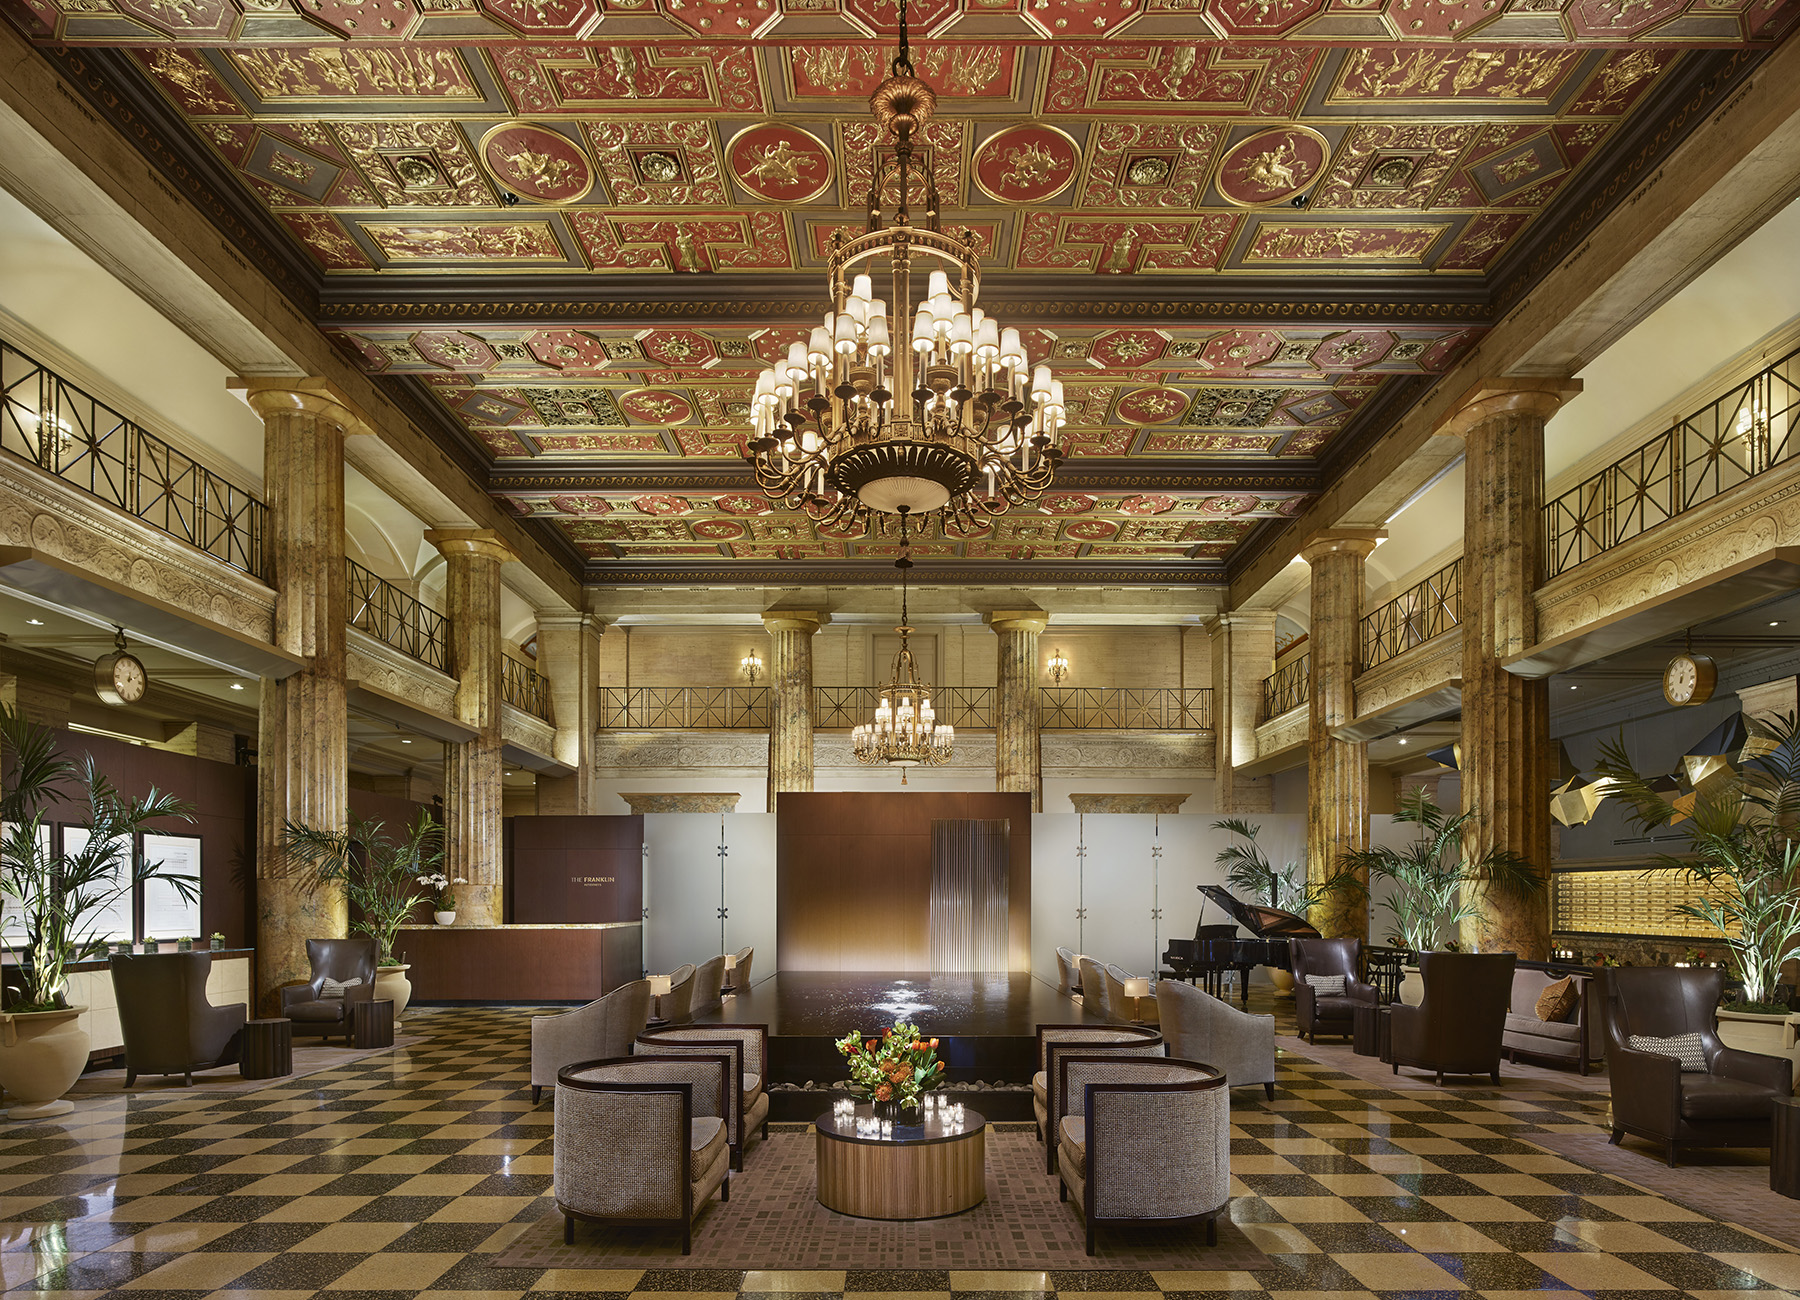 Lobby of historic Franklin Residences building with water feature and front desk